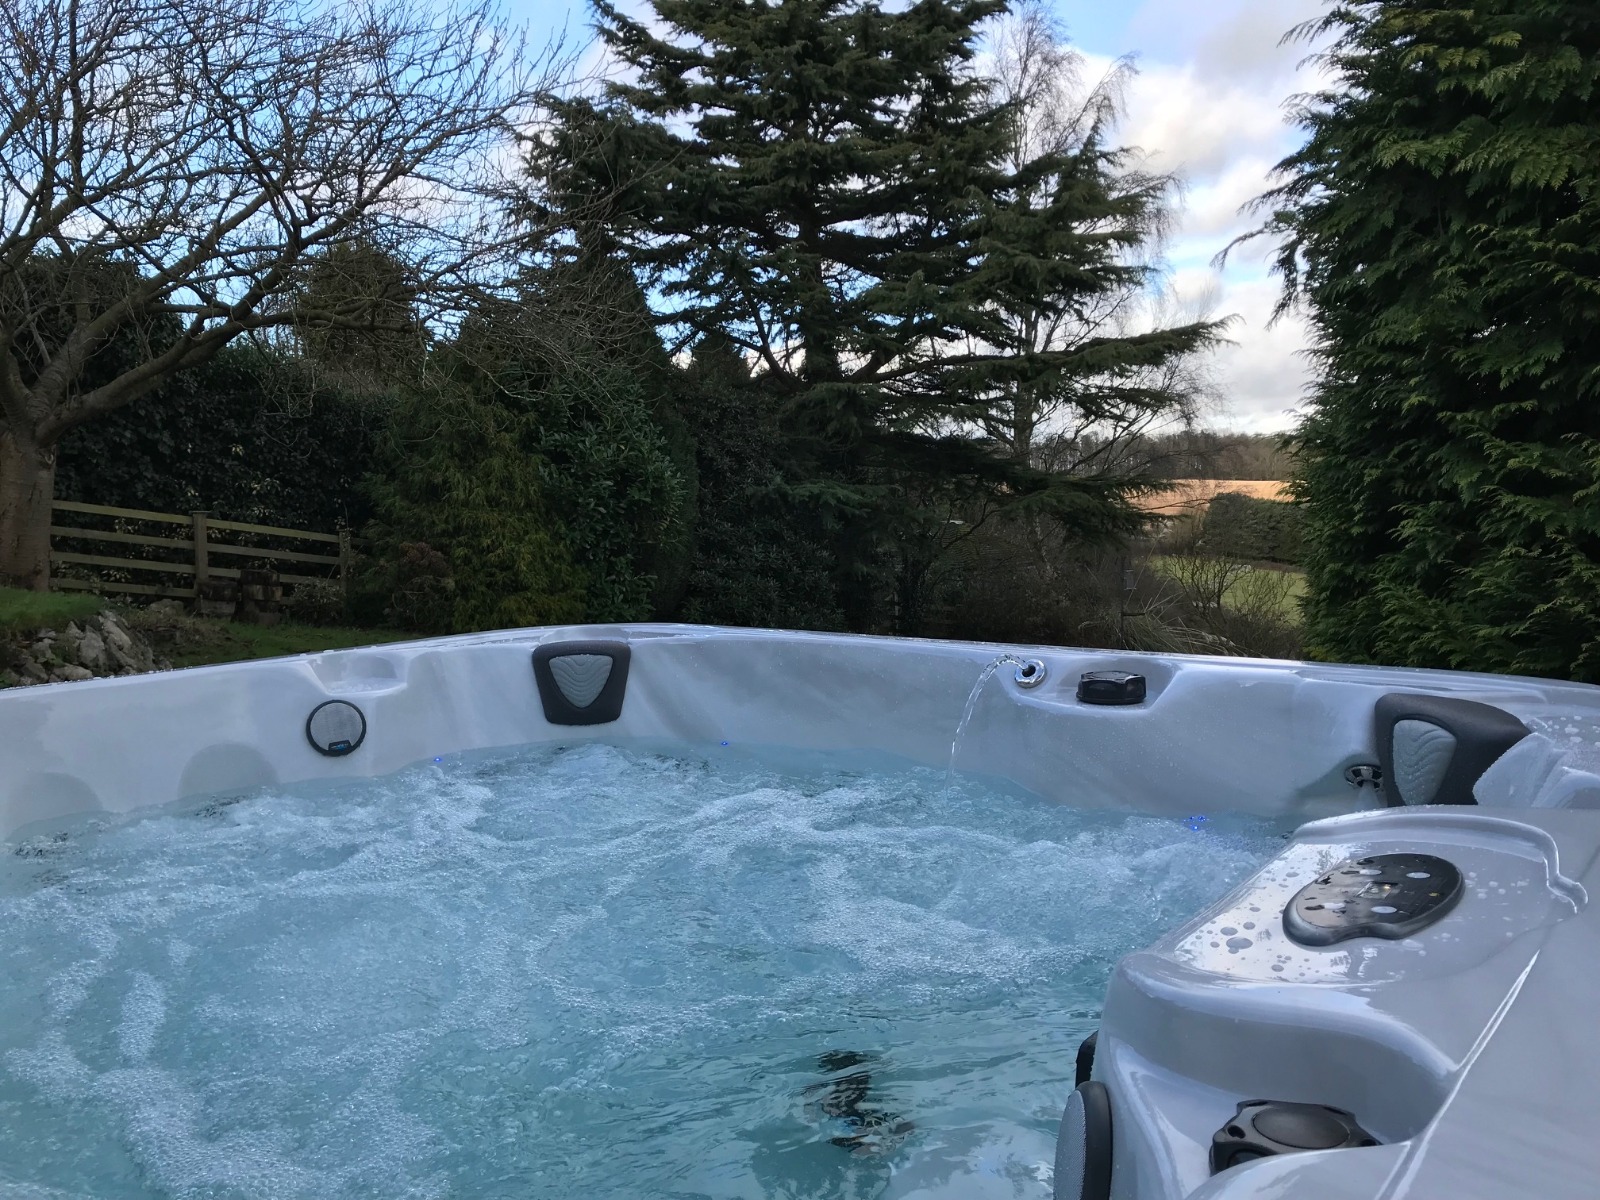 Running a hot tub doesn't have to cost the Earth.